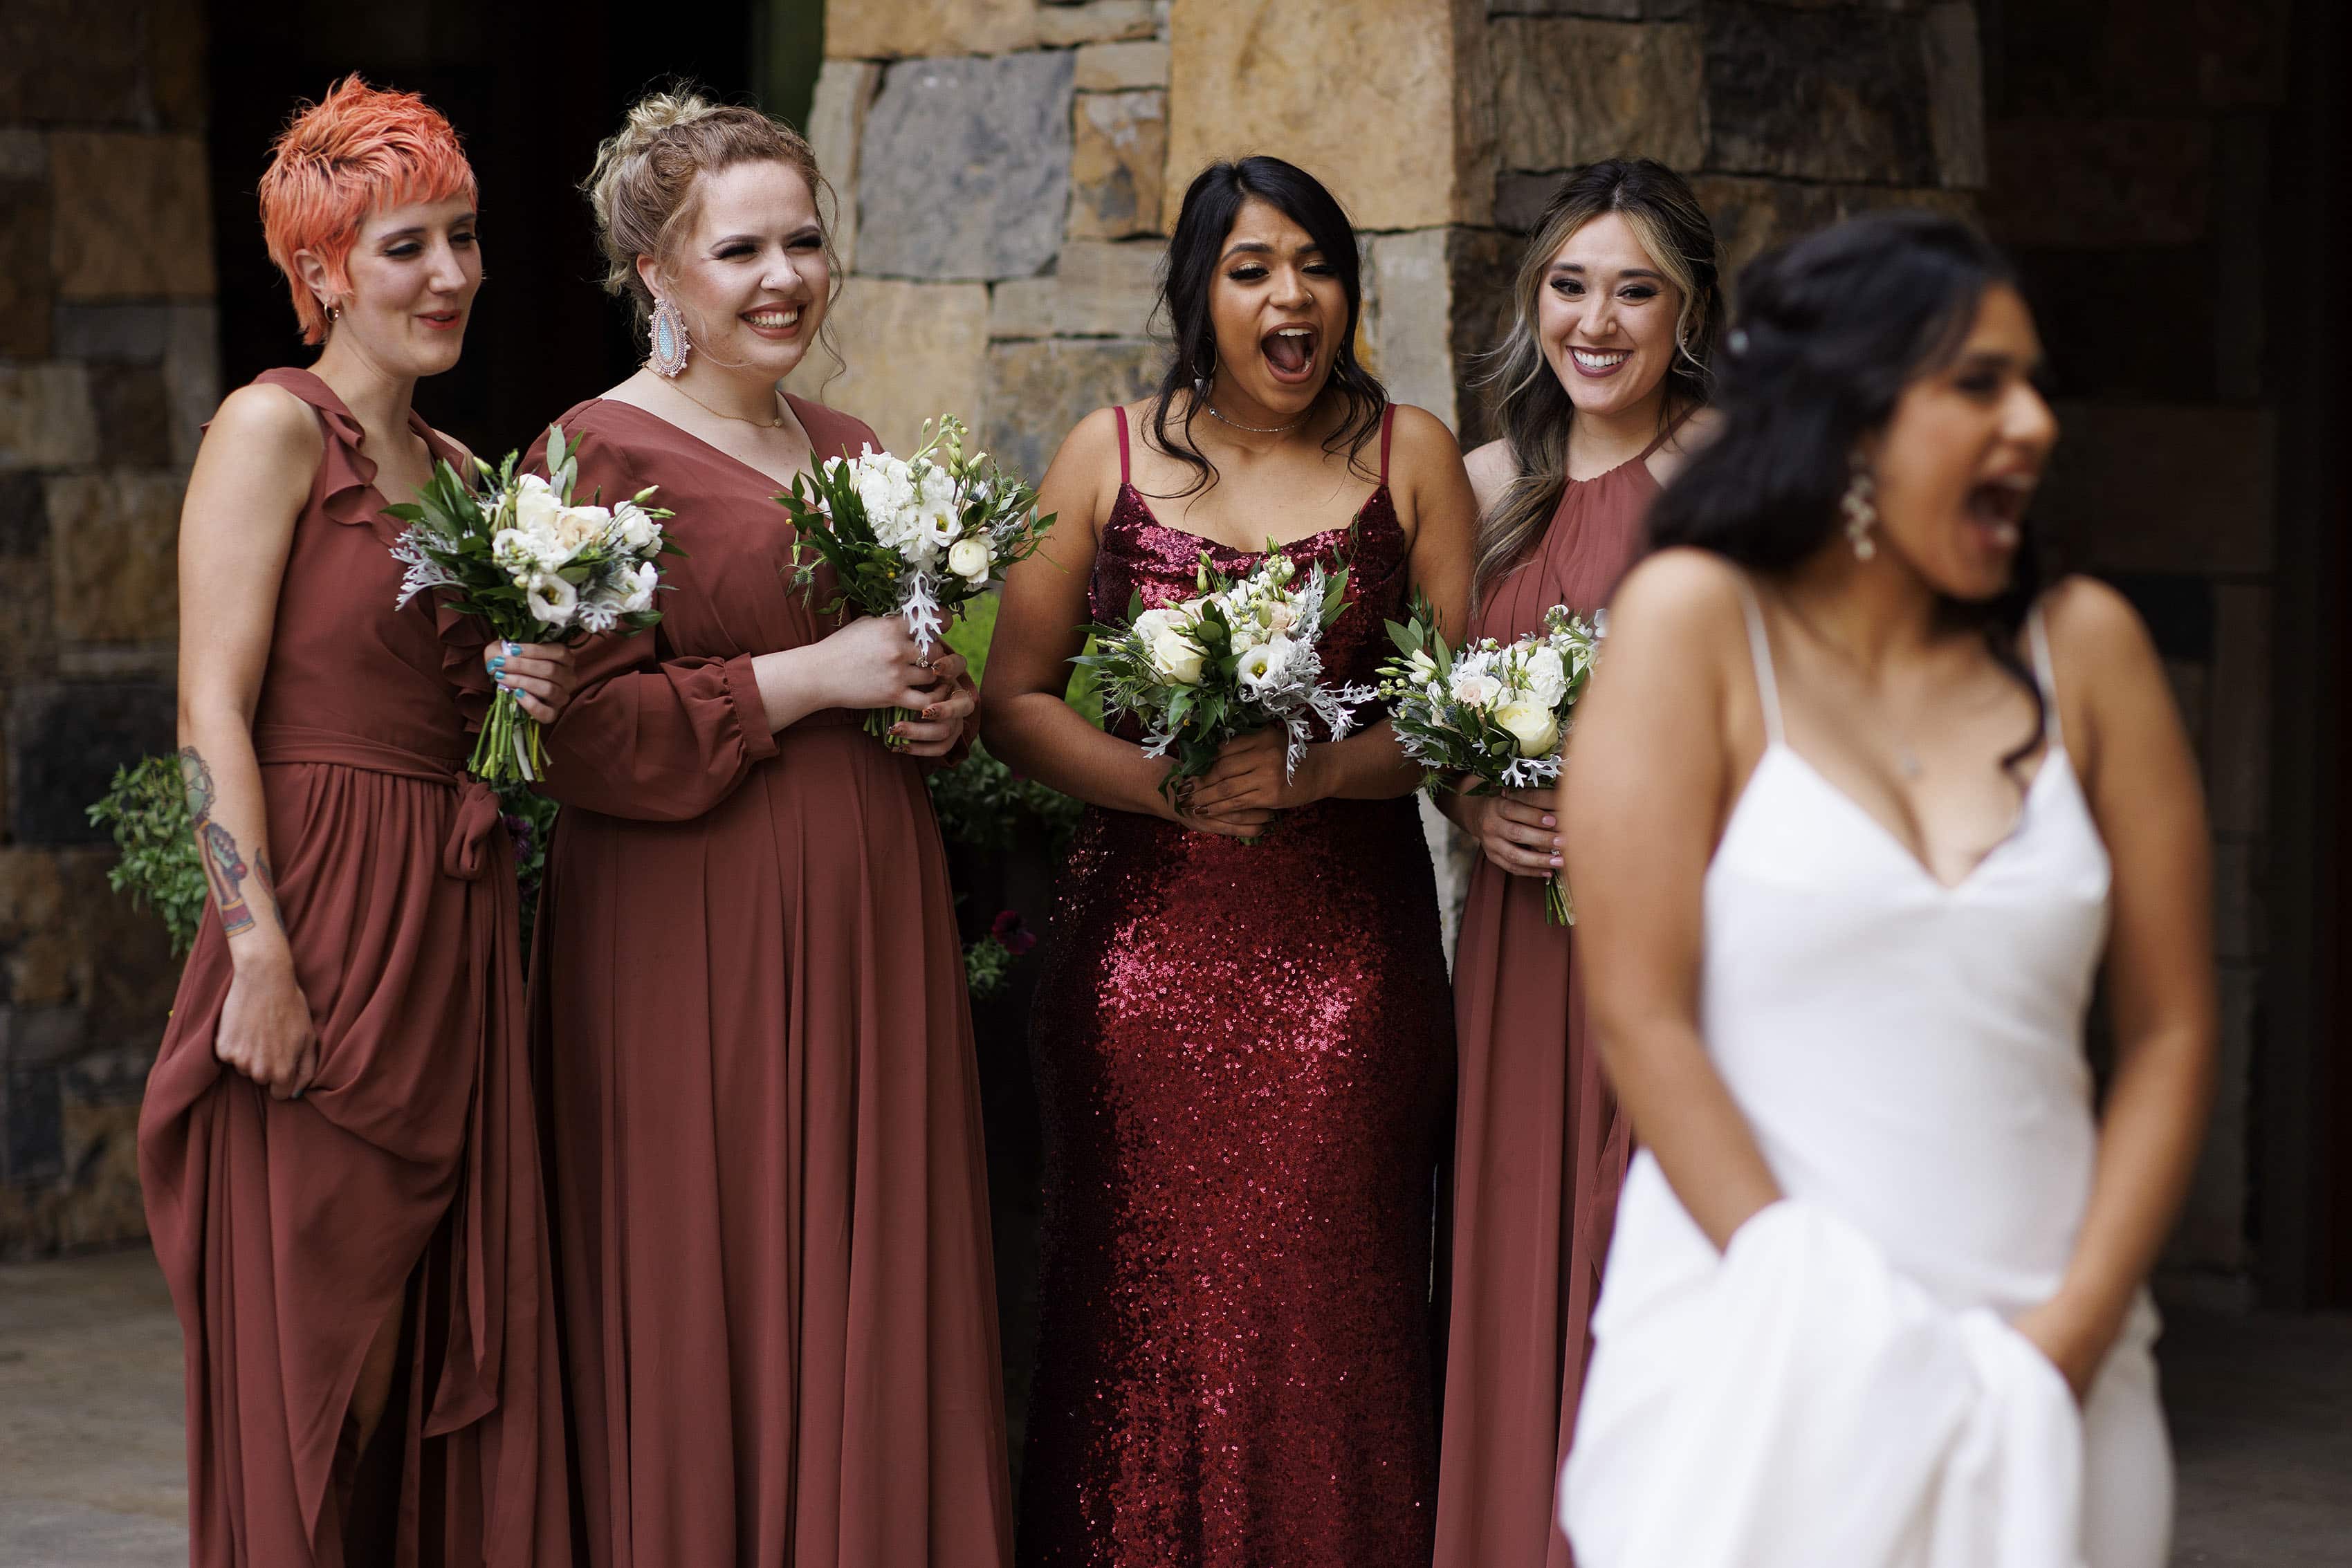 Bridesmaids react to seeing the bride in her gown